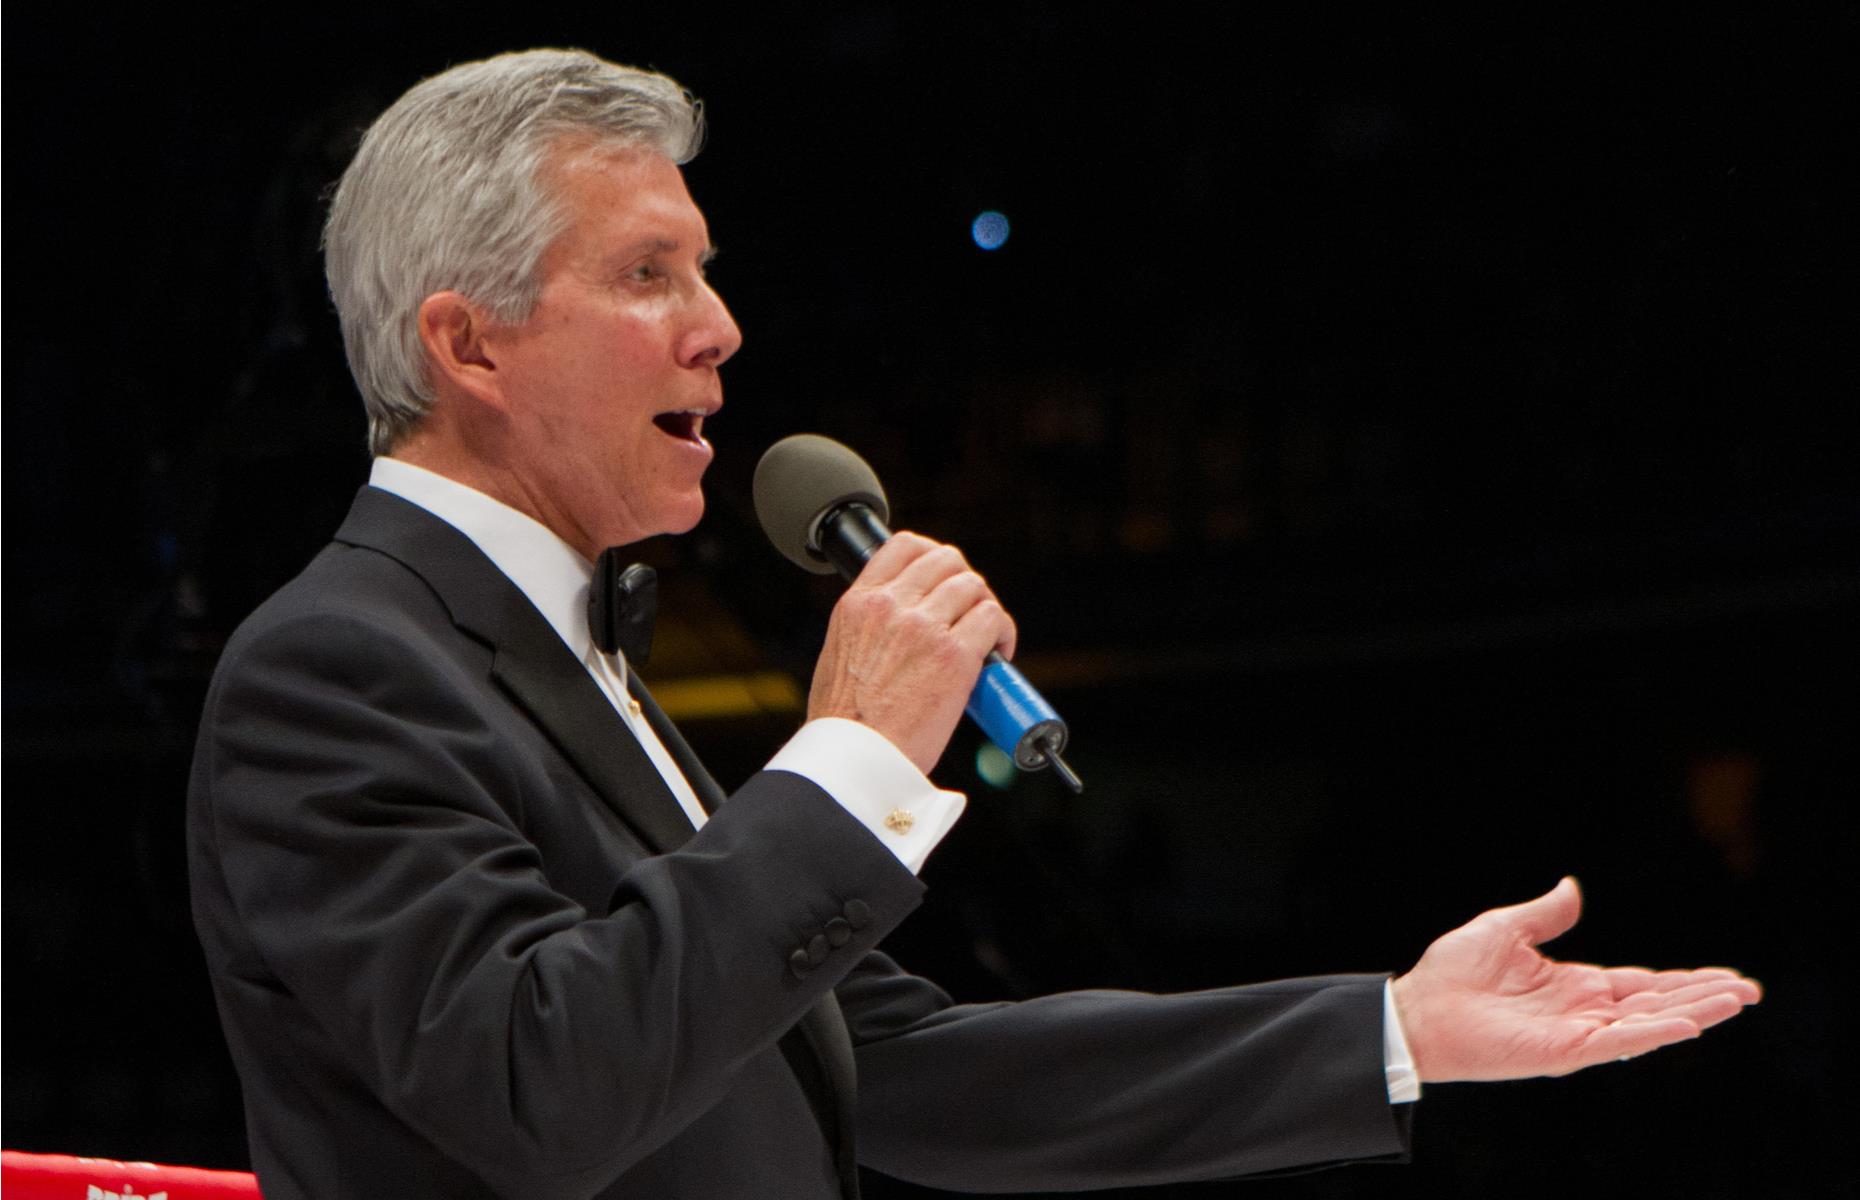 Michael Buffer's "Let’s get ready to rumble" catchphrase